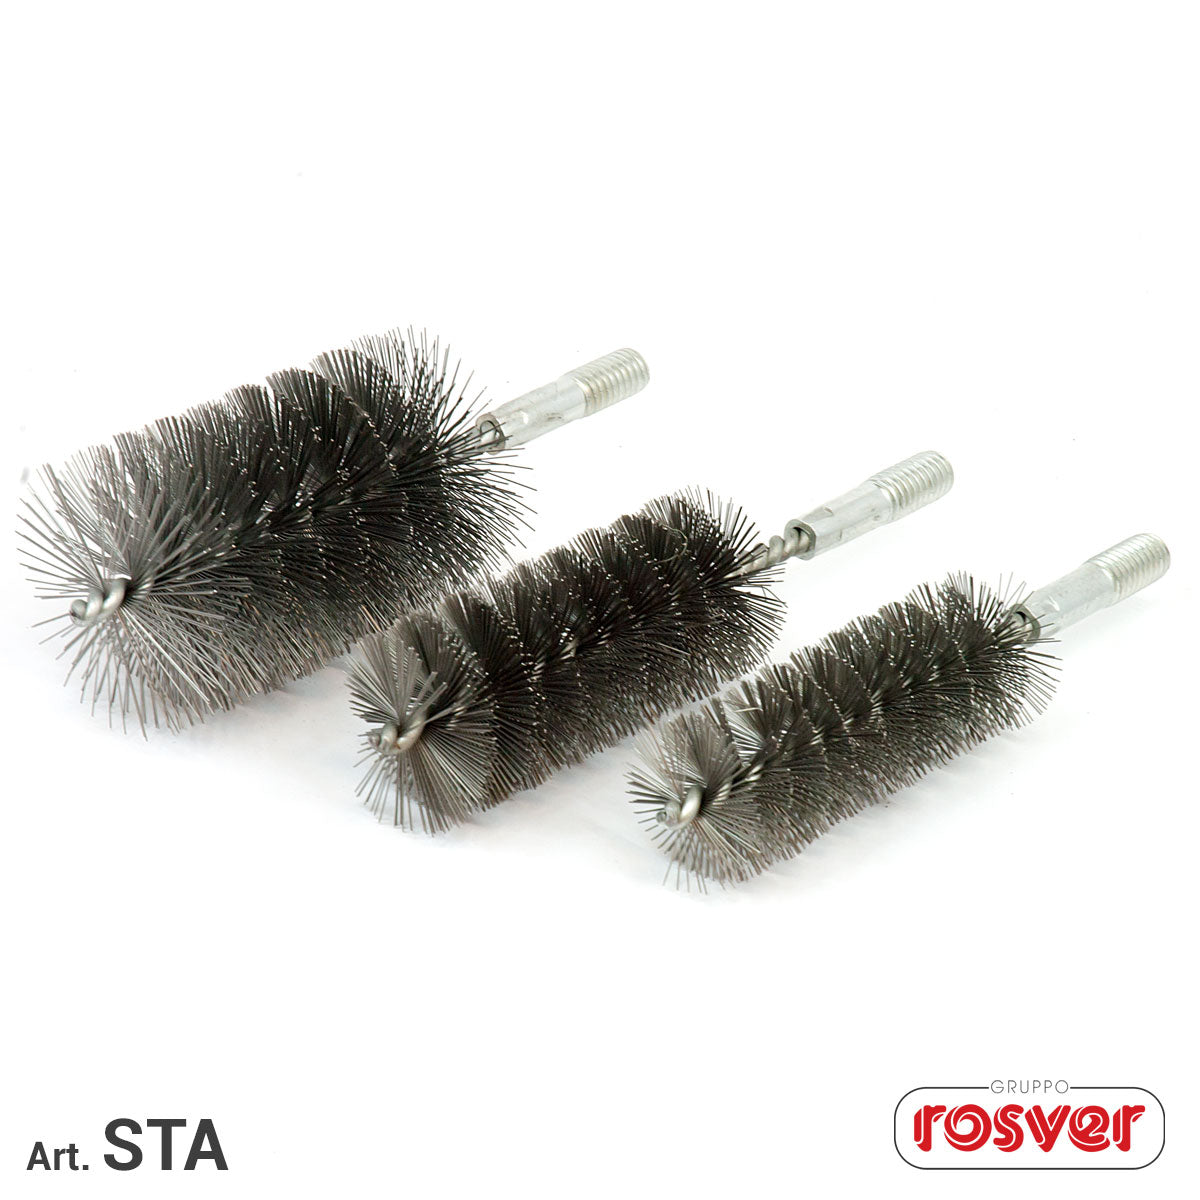 Steel Brushes with Thread Rosver - STA D.12xM6 - Conf.10pz